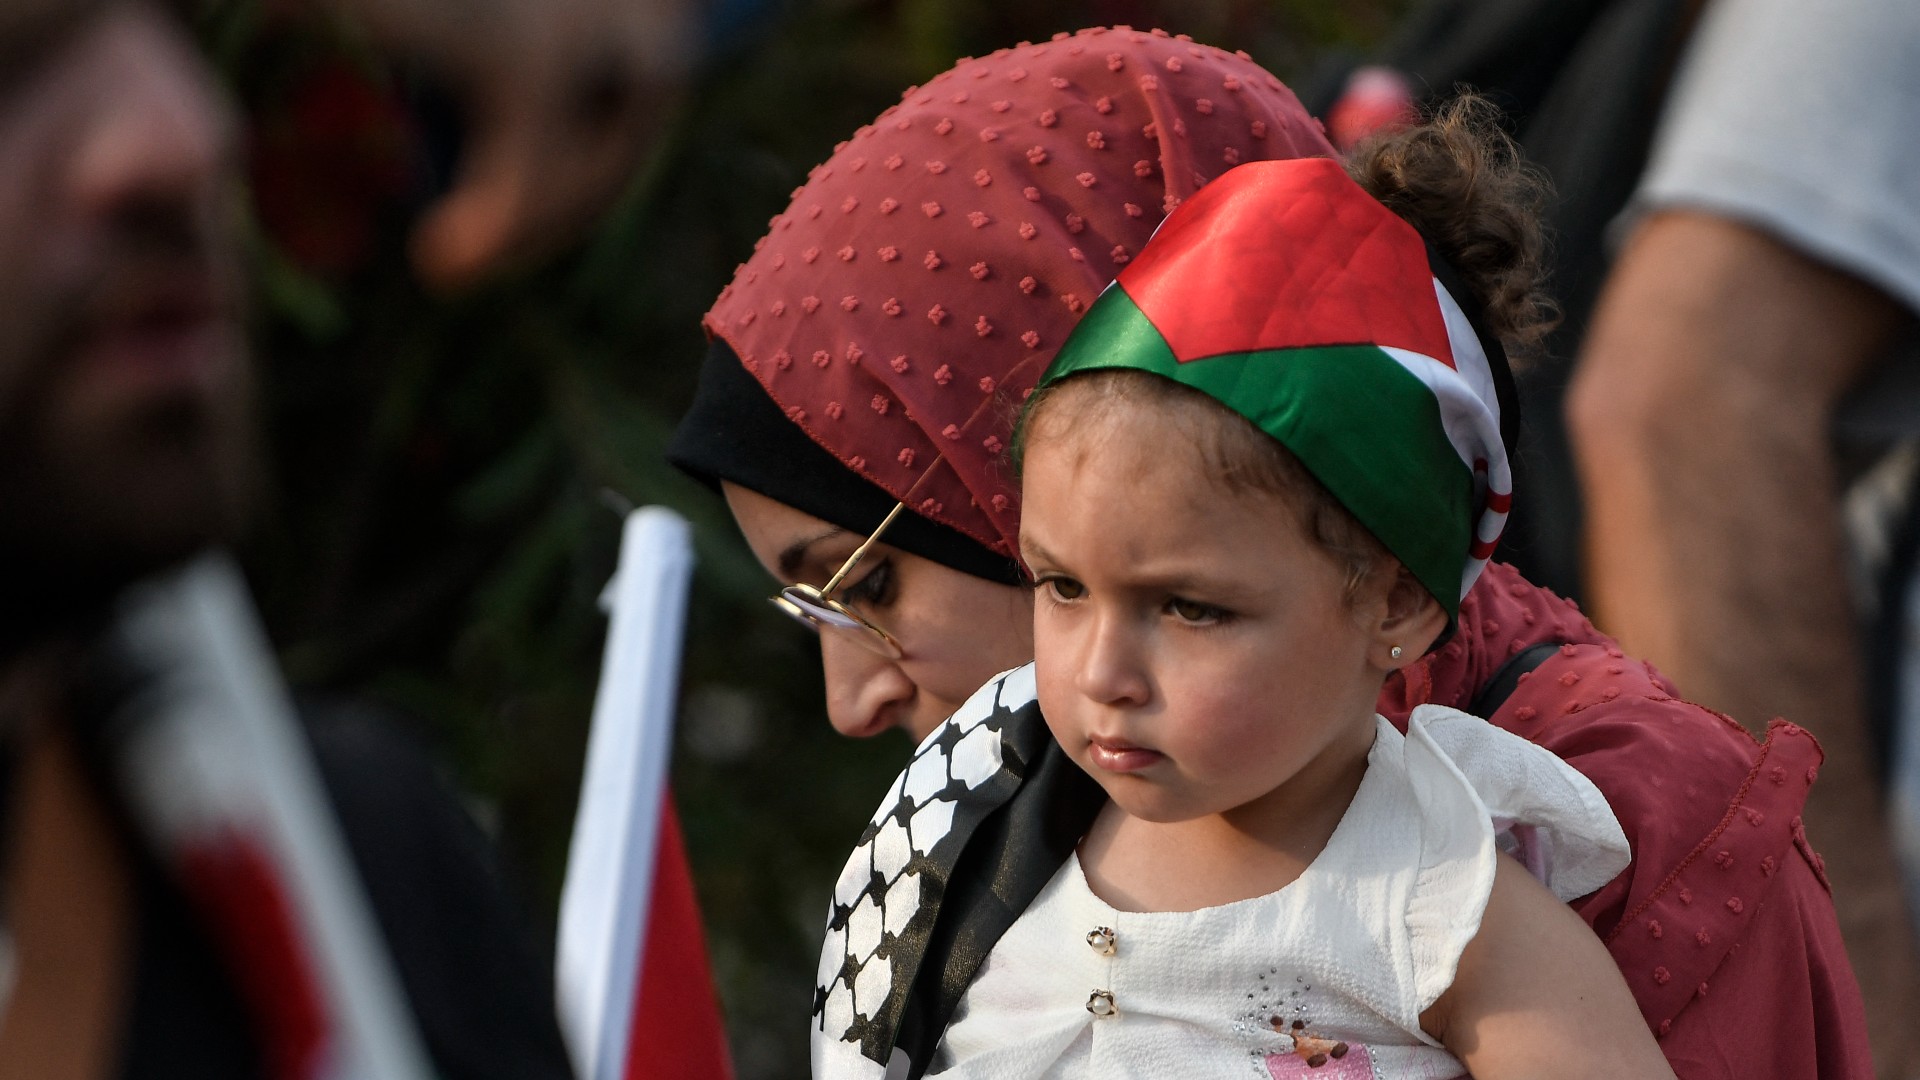 A mother and her child are pictured as protesters take part in a demonstration in front of the Israeli embassy to support Palestinians after Al Jazeera reporter Shireen Abu Akleh was killed, in Athens on May 16, 2022.